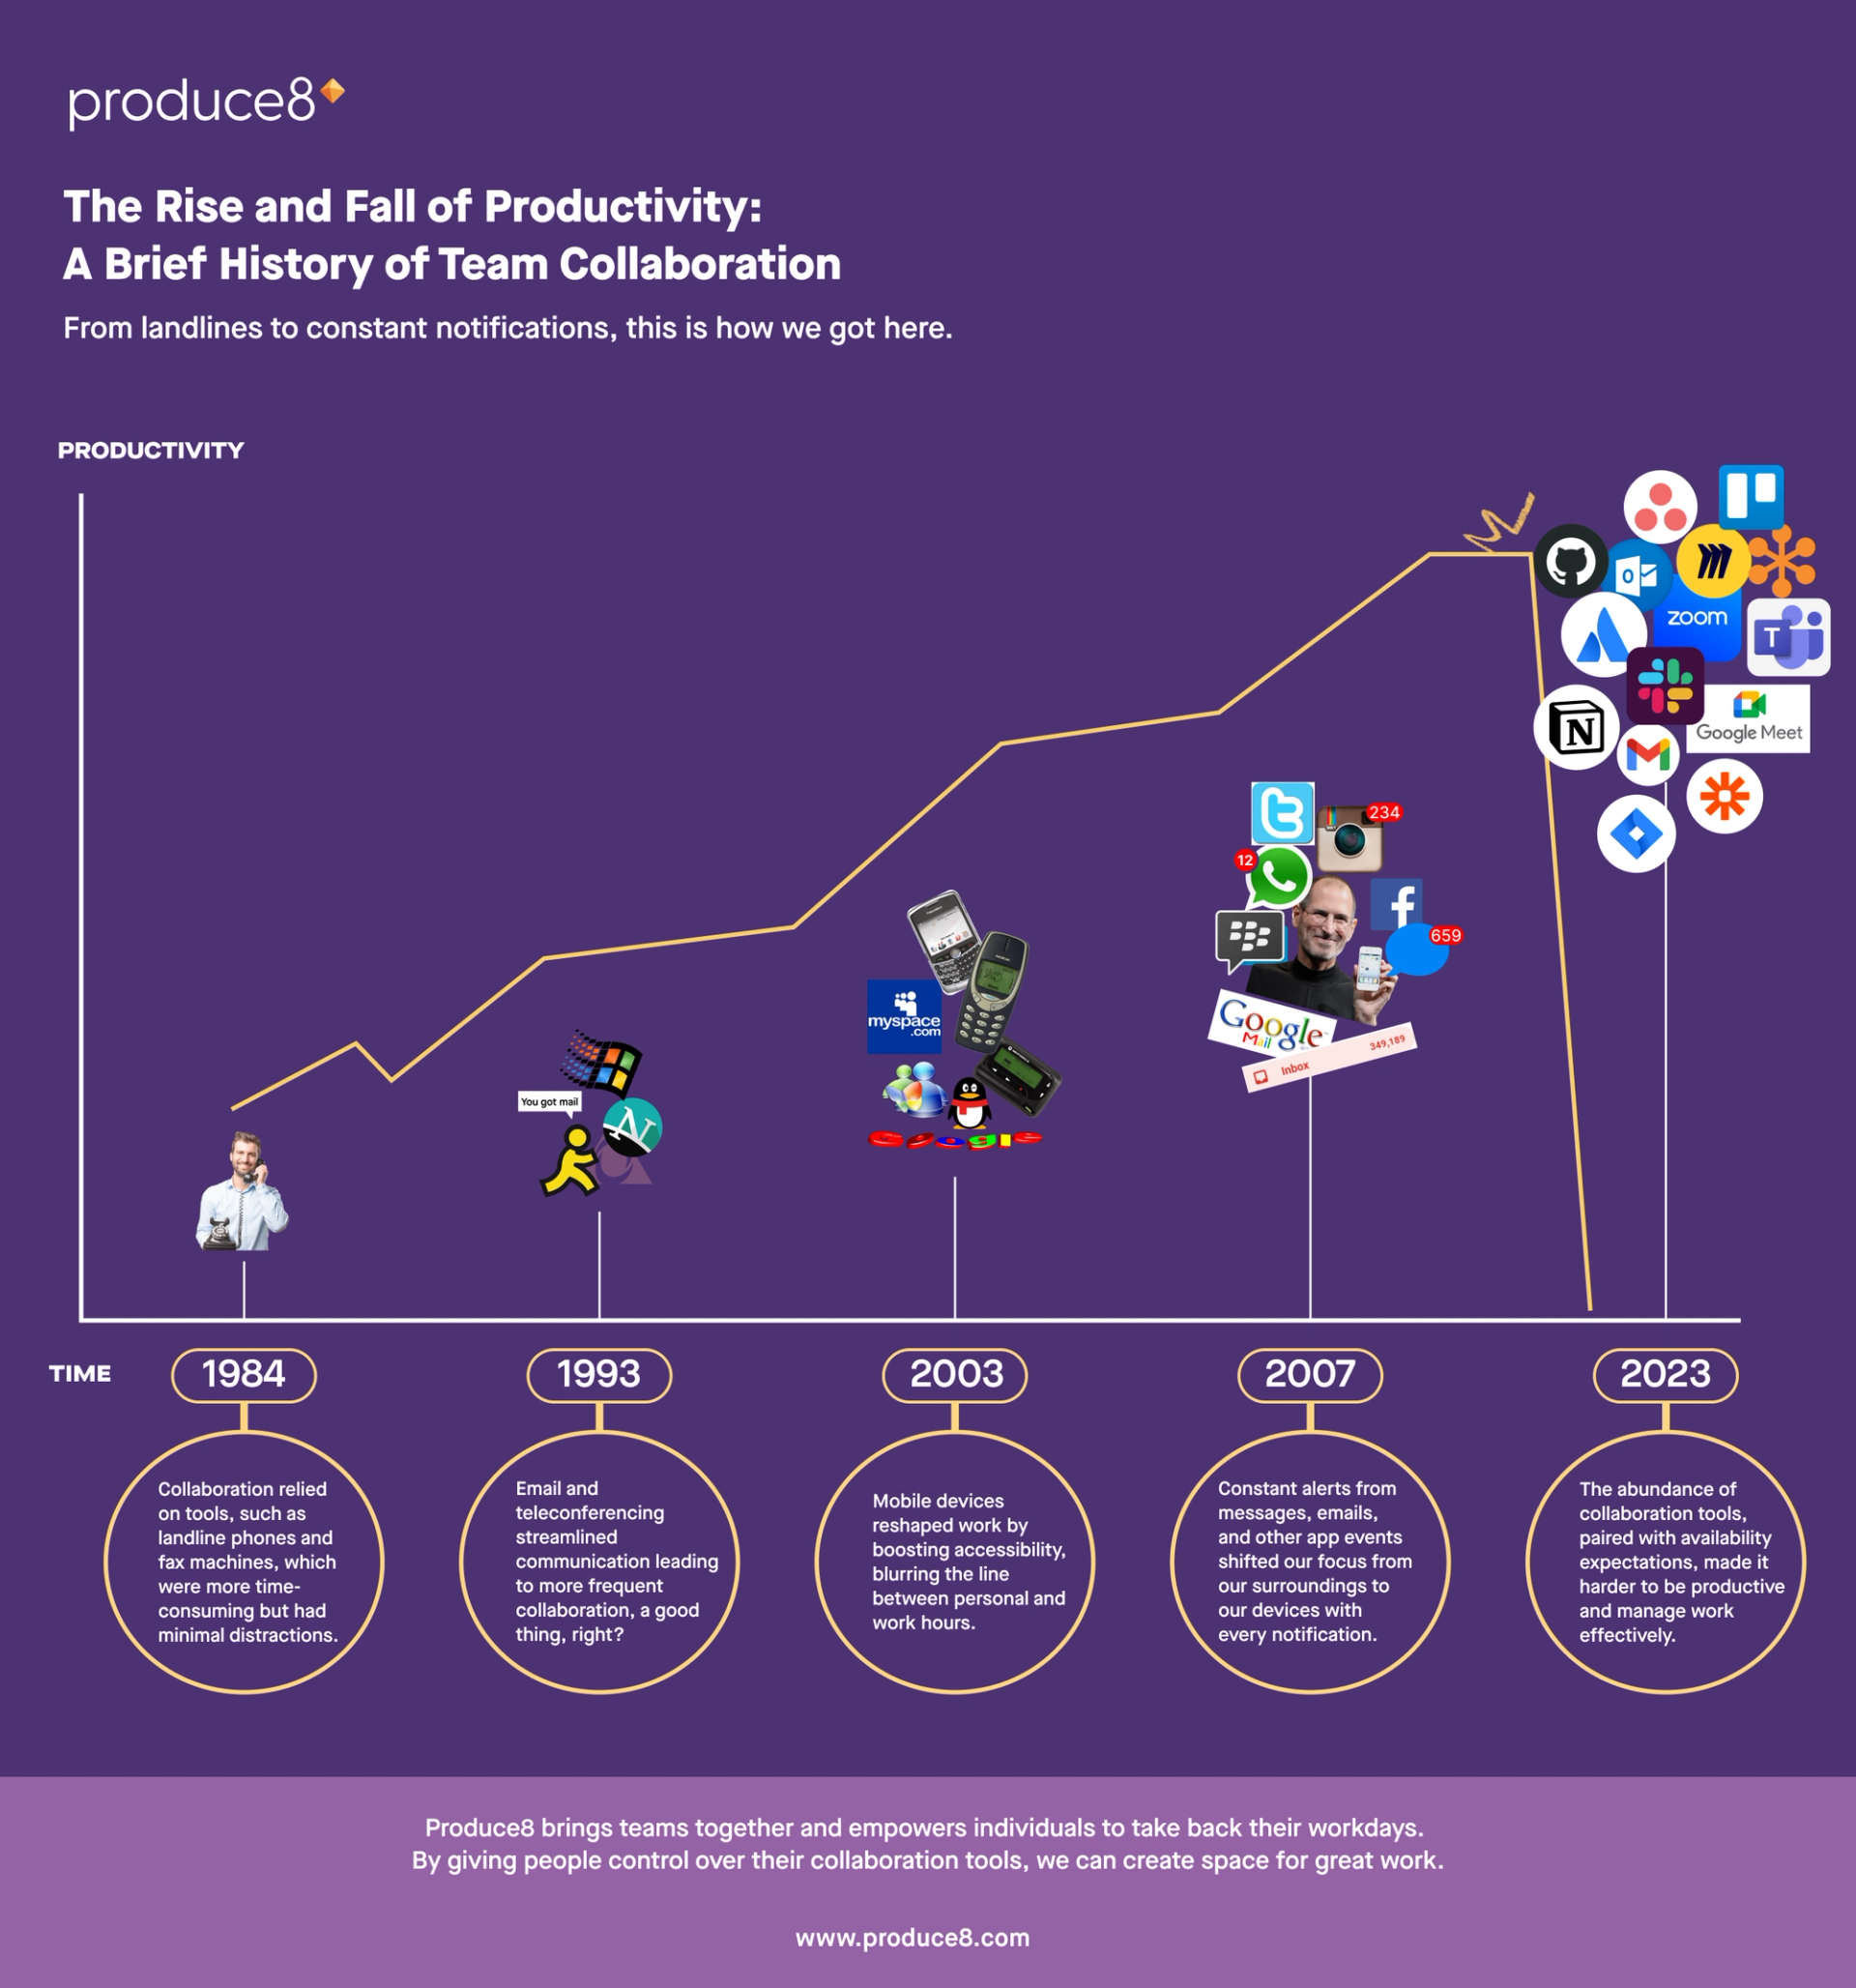 history of team collaboration infographic - productivity rising and falling chart